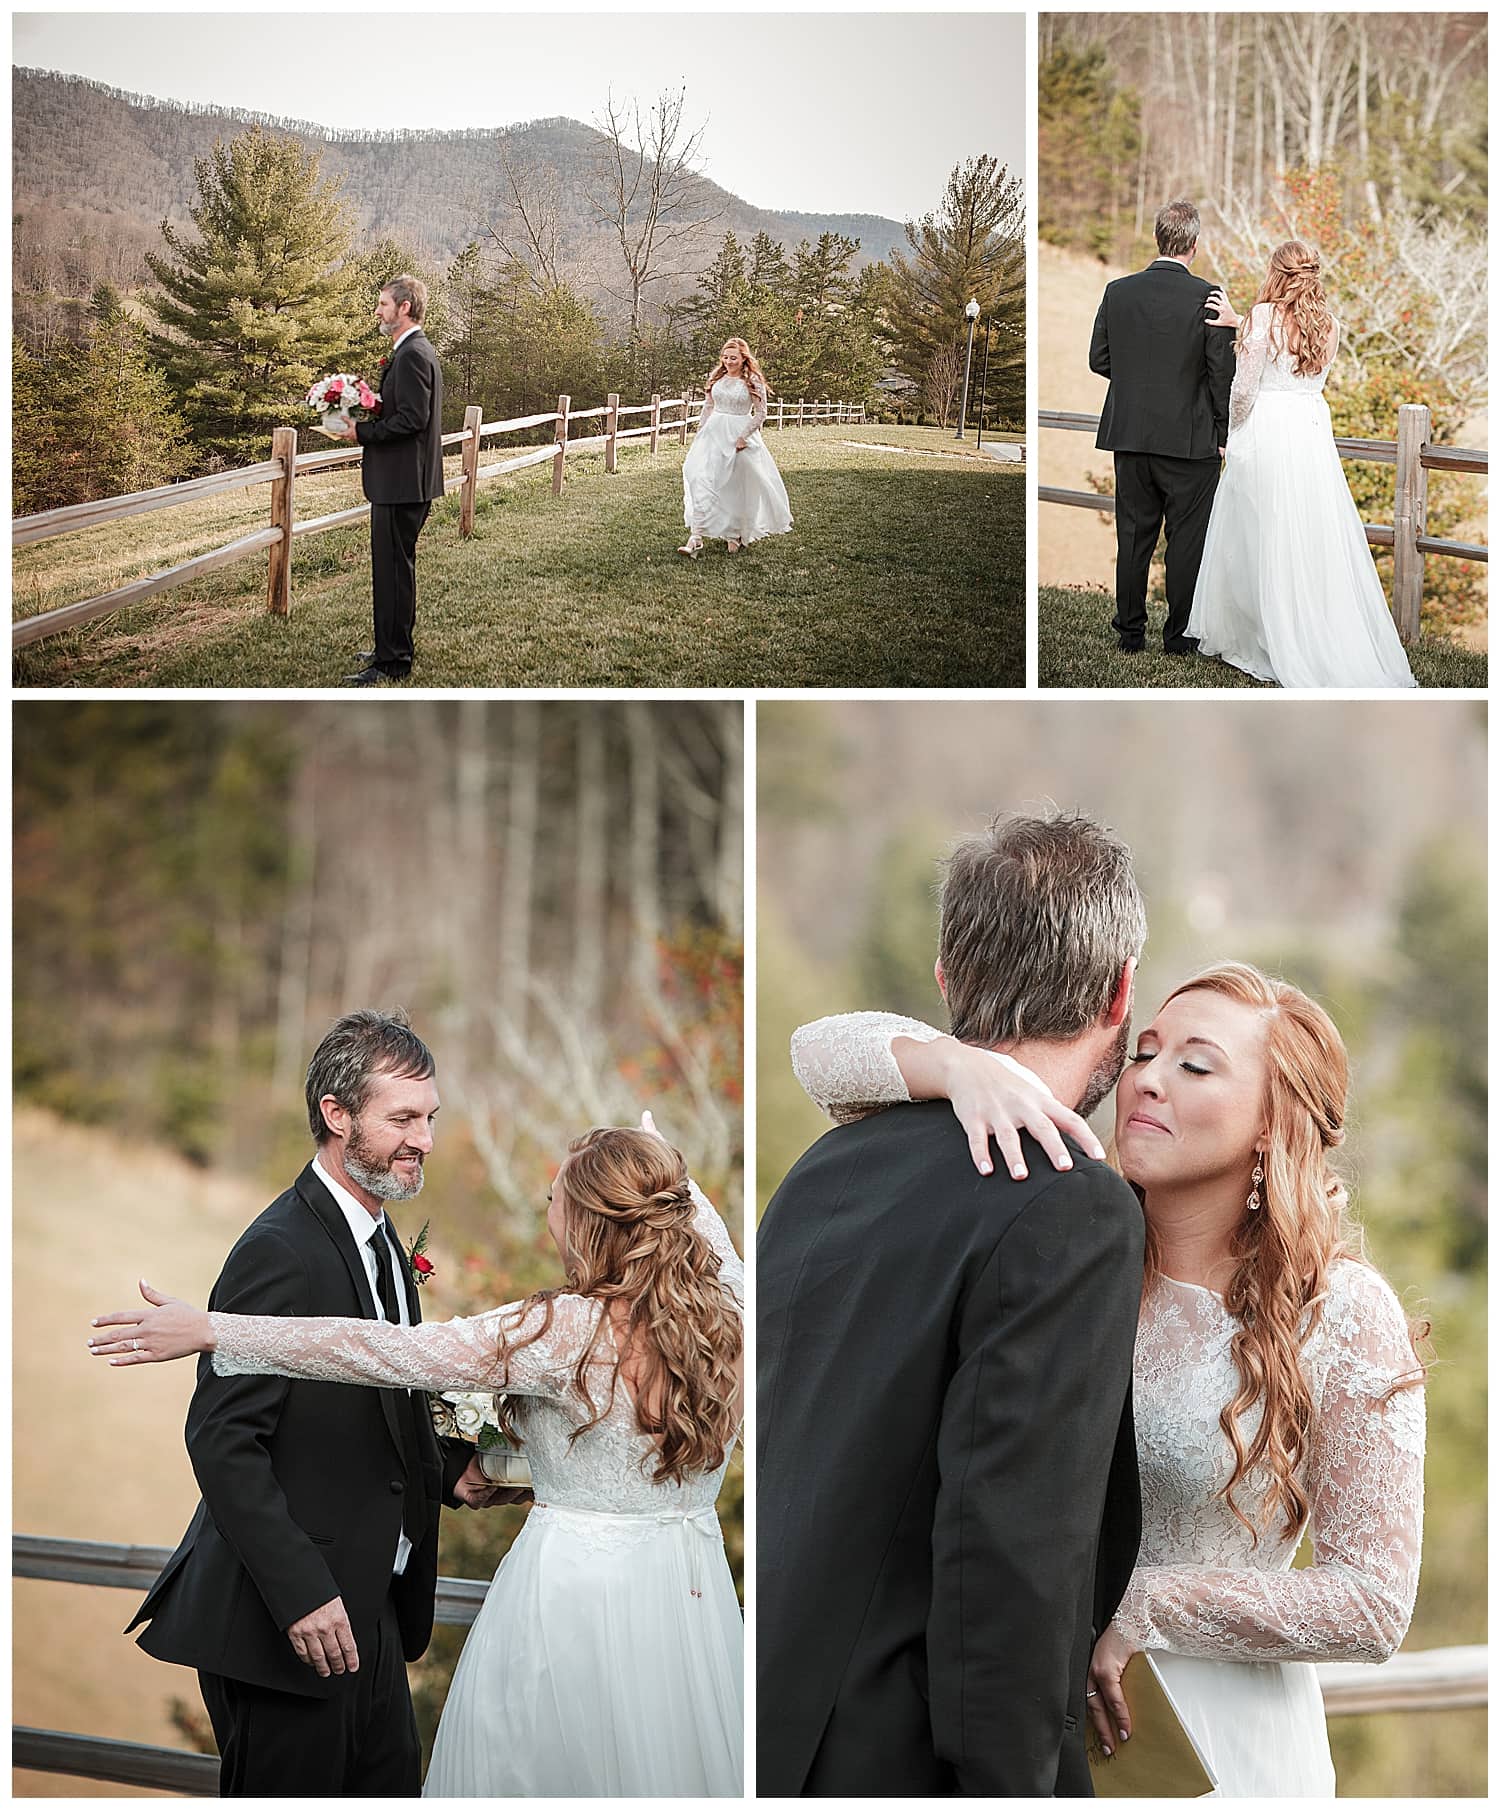 Photo collage of bride and walking up behind her father sharing her first look with him on her wedding day, embracing one another with a hug smiling